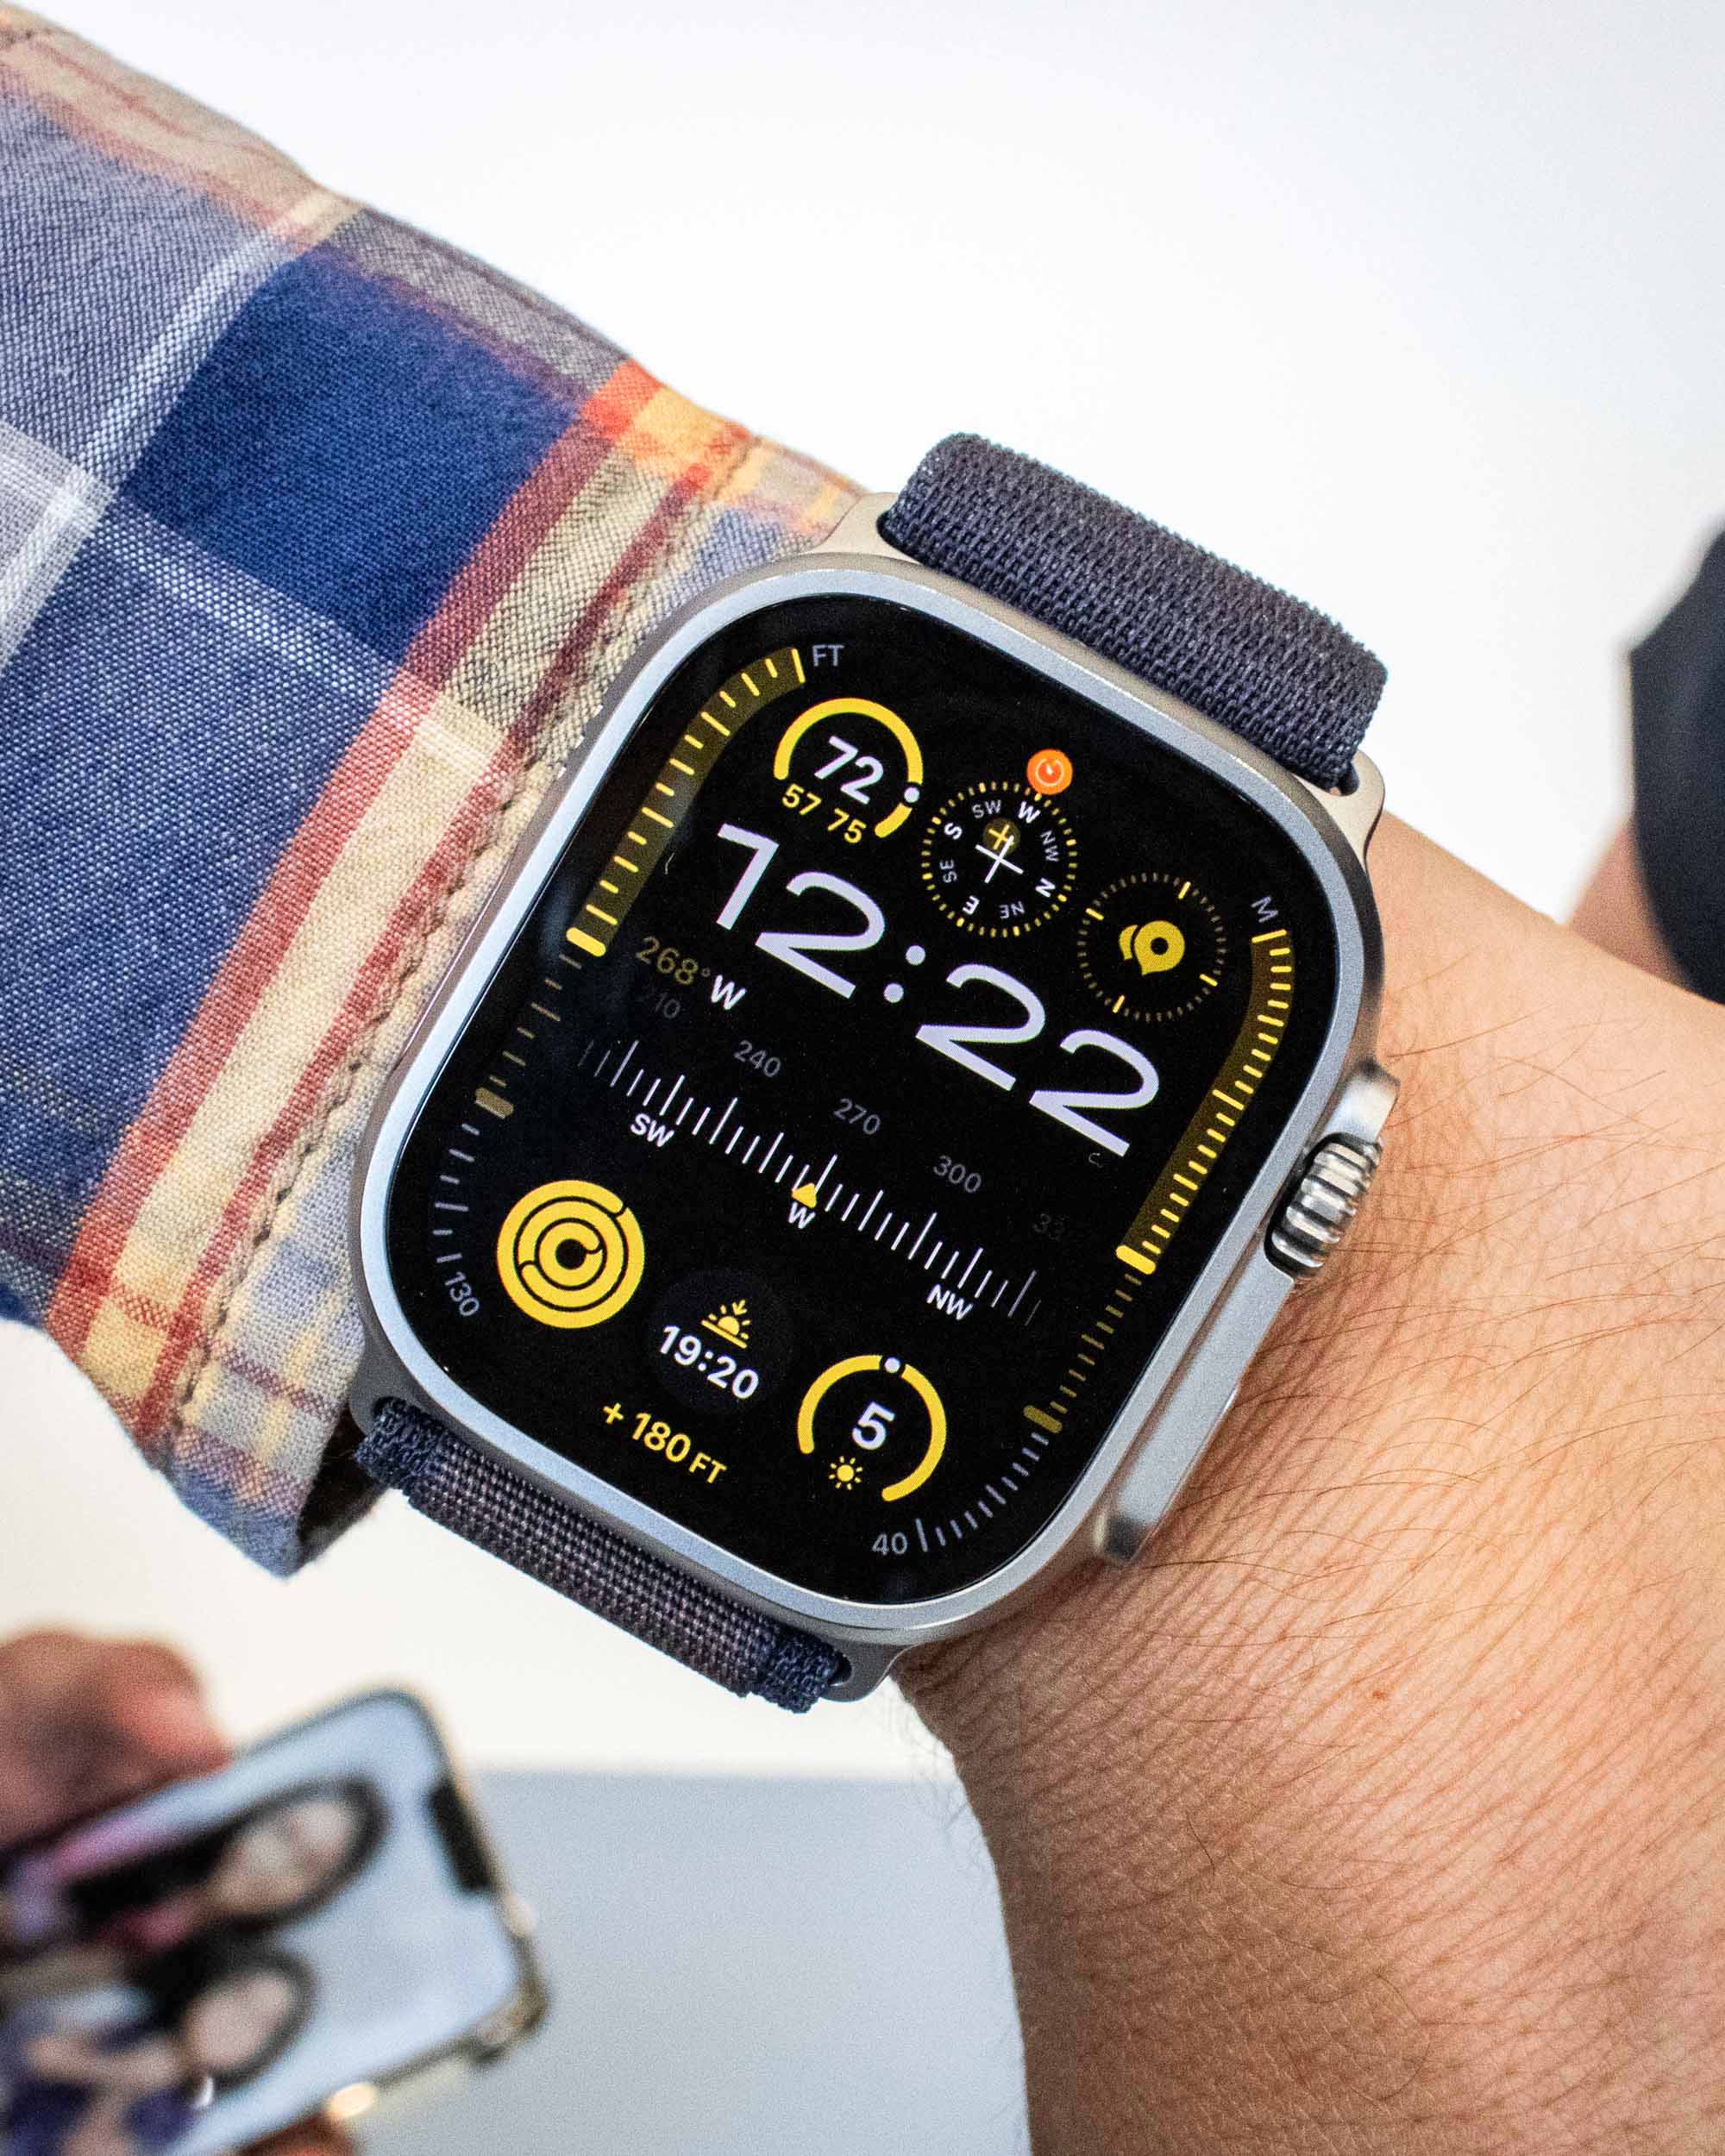 Apple Watch 9 and Watch Ultra 2 Could Get Better at Heart Rate Reading